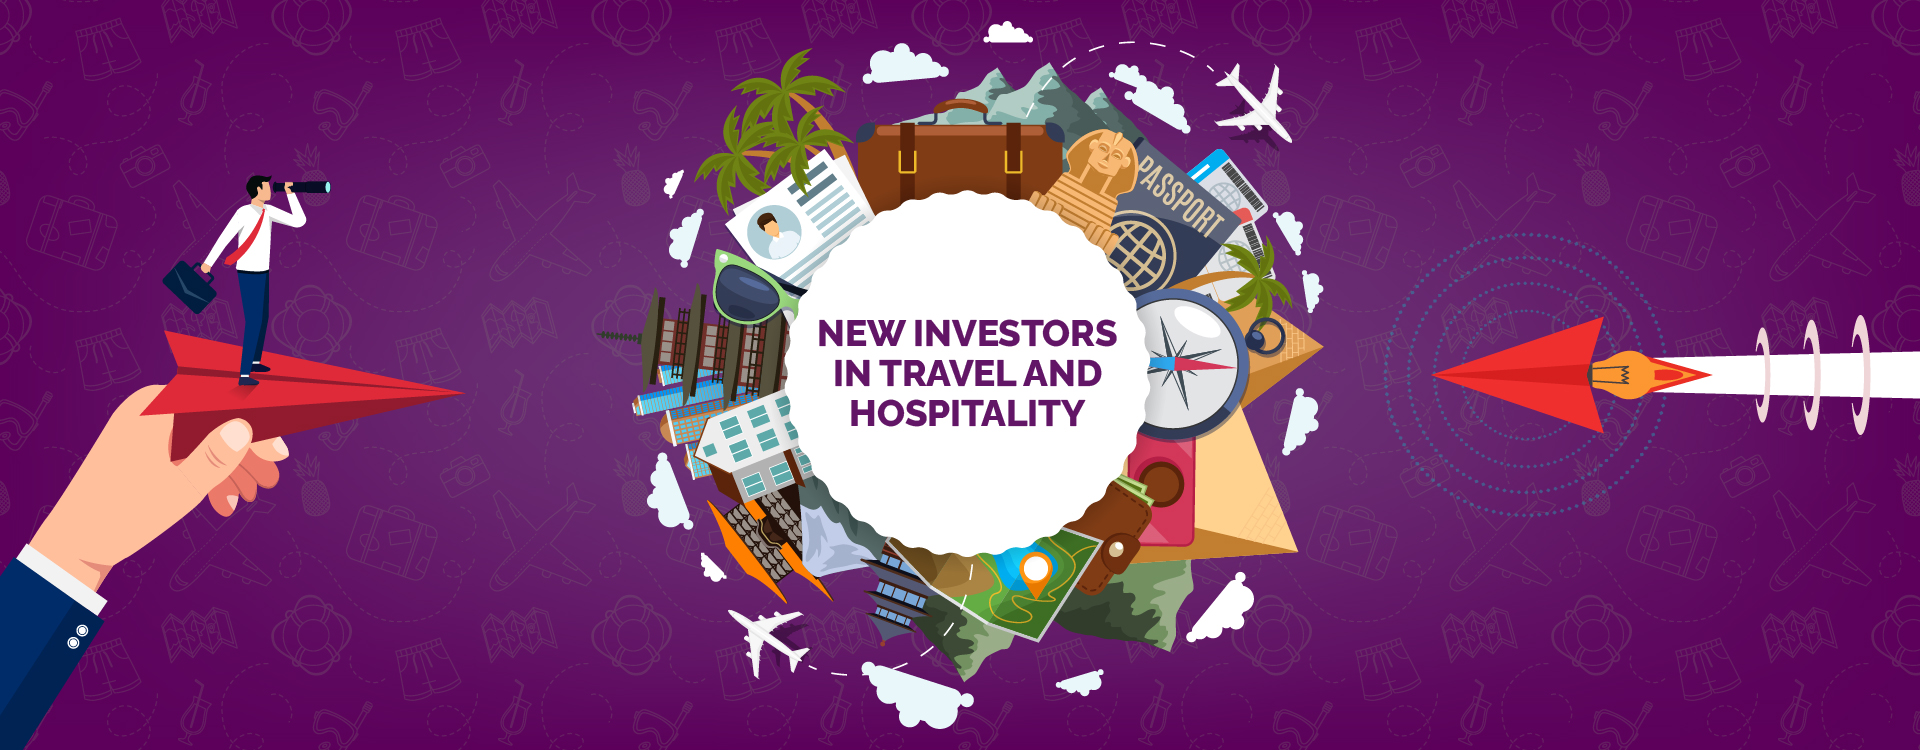 New Investors in Travel and Hospitality - Dutch Uncles